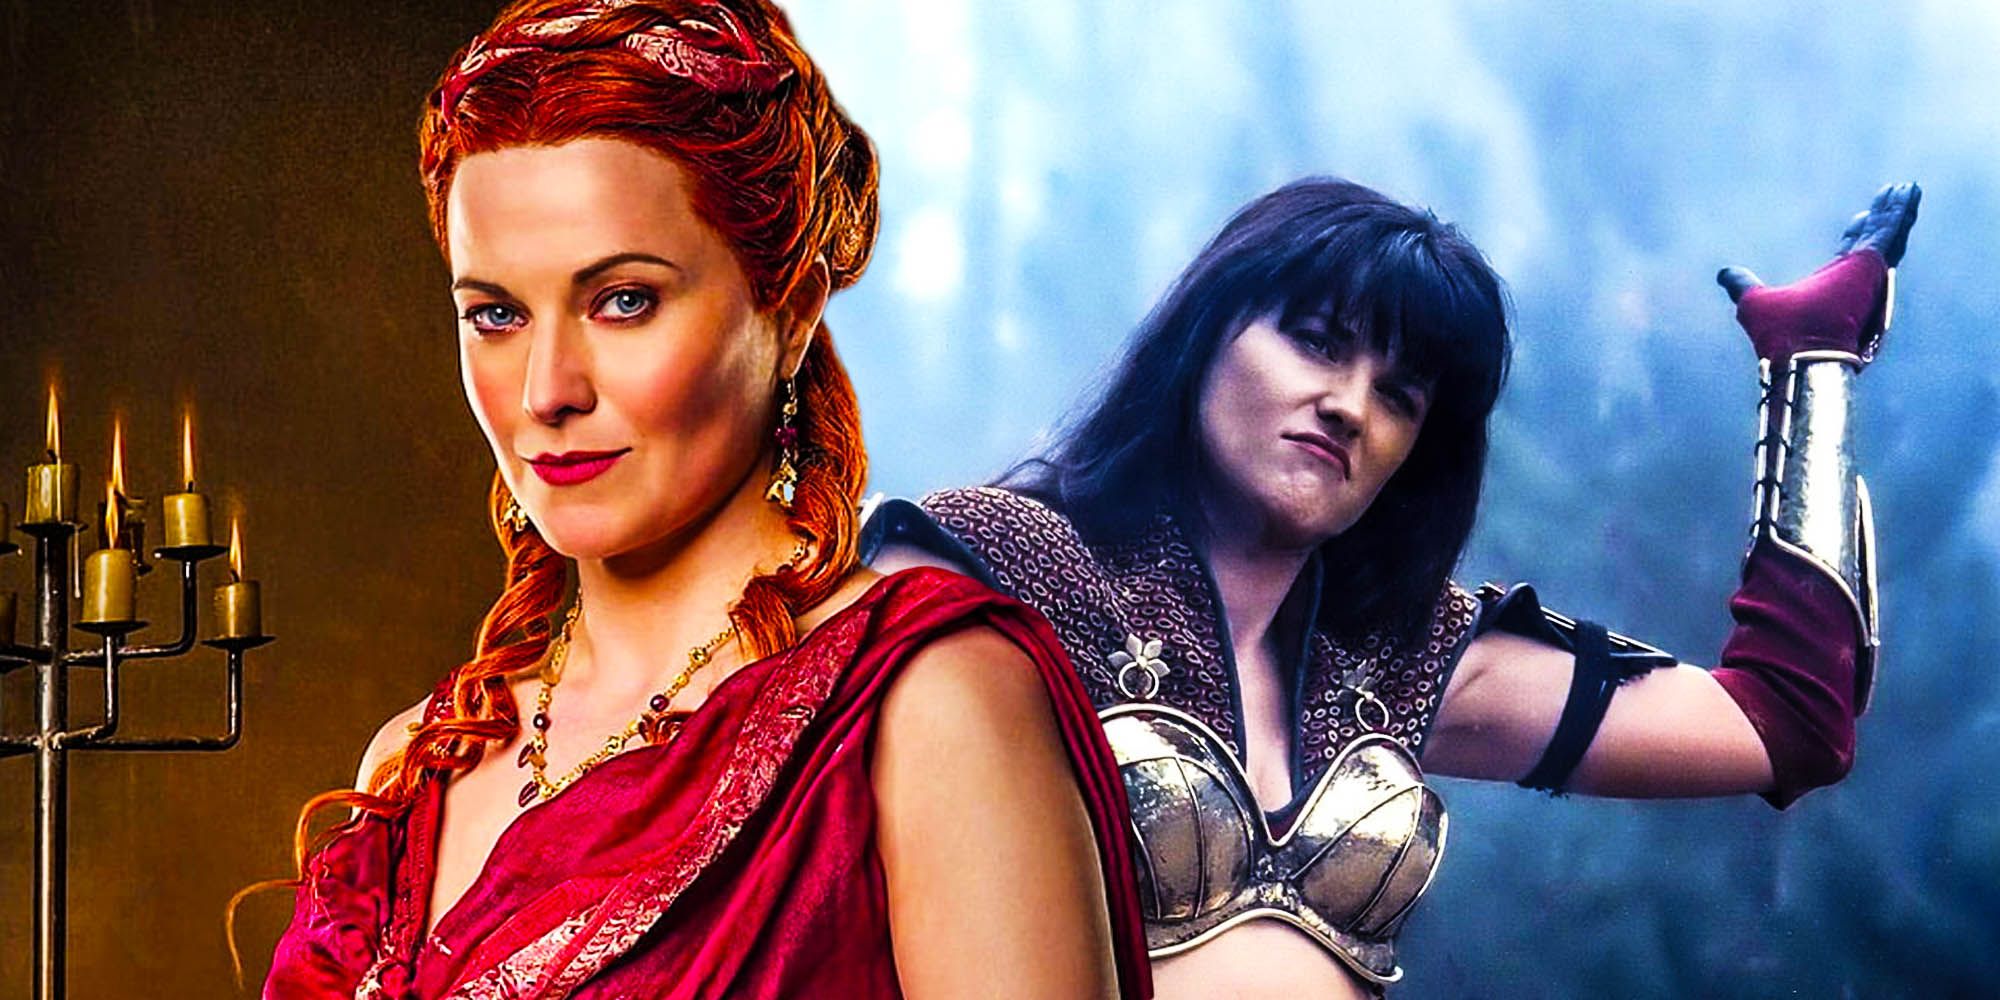 Lucy Lawless Xena warrior princess reboot